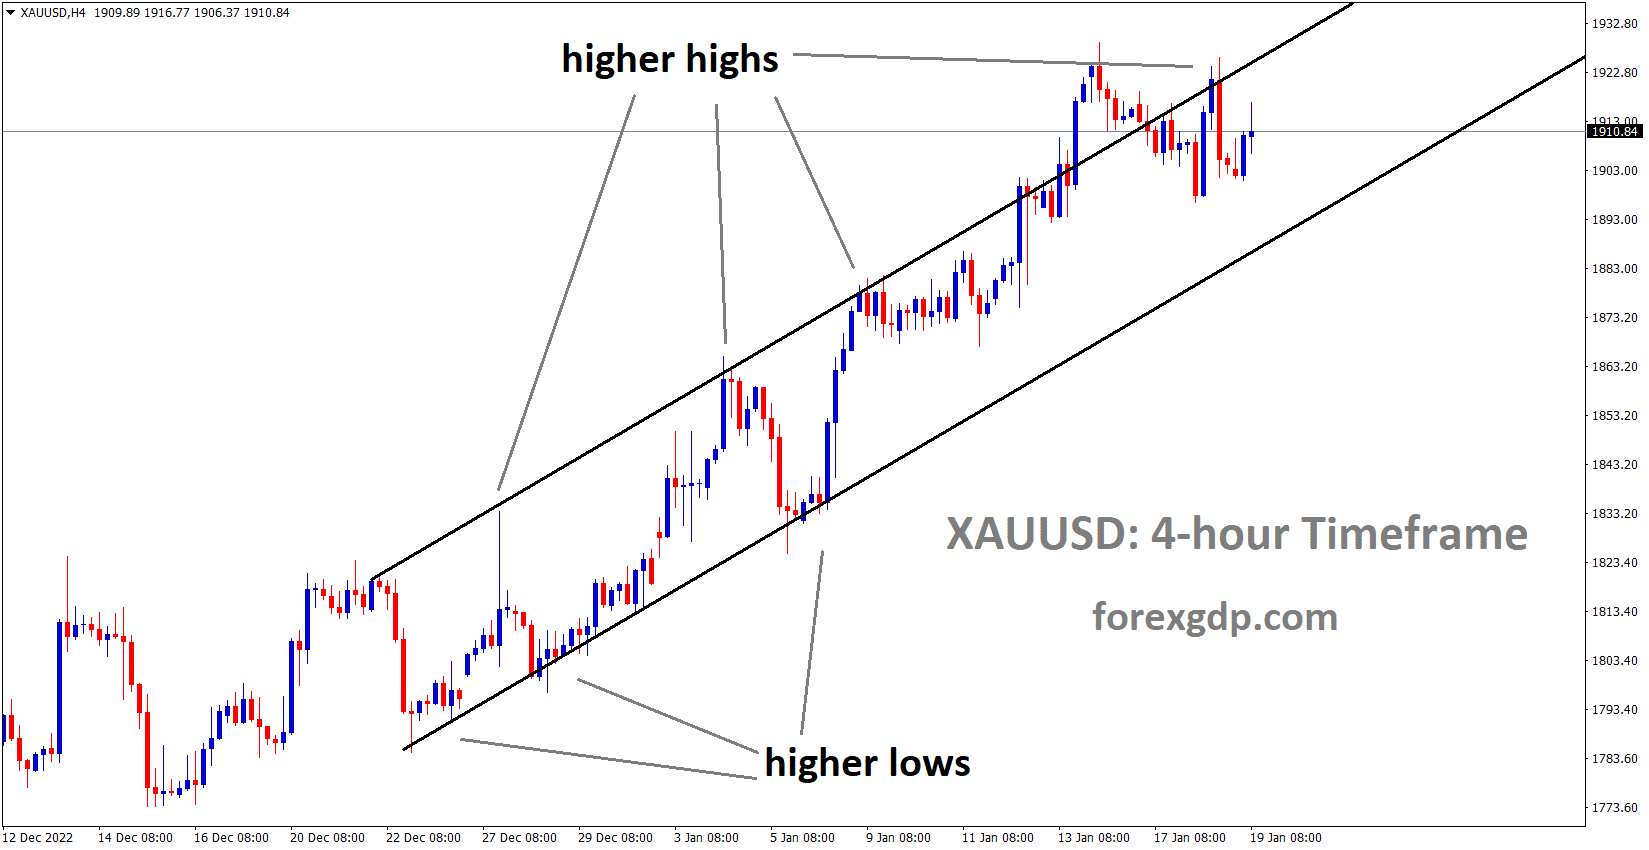 XAUUSD Gold price is moving in an Ascending channel and the market has reached the higher high area of the channel 3